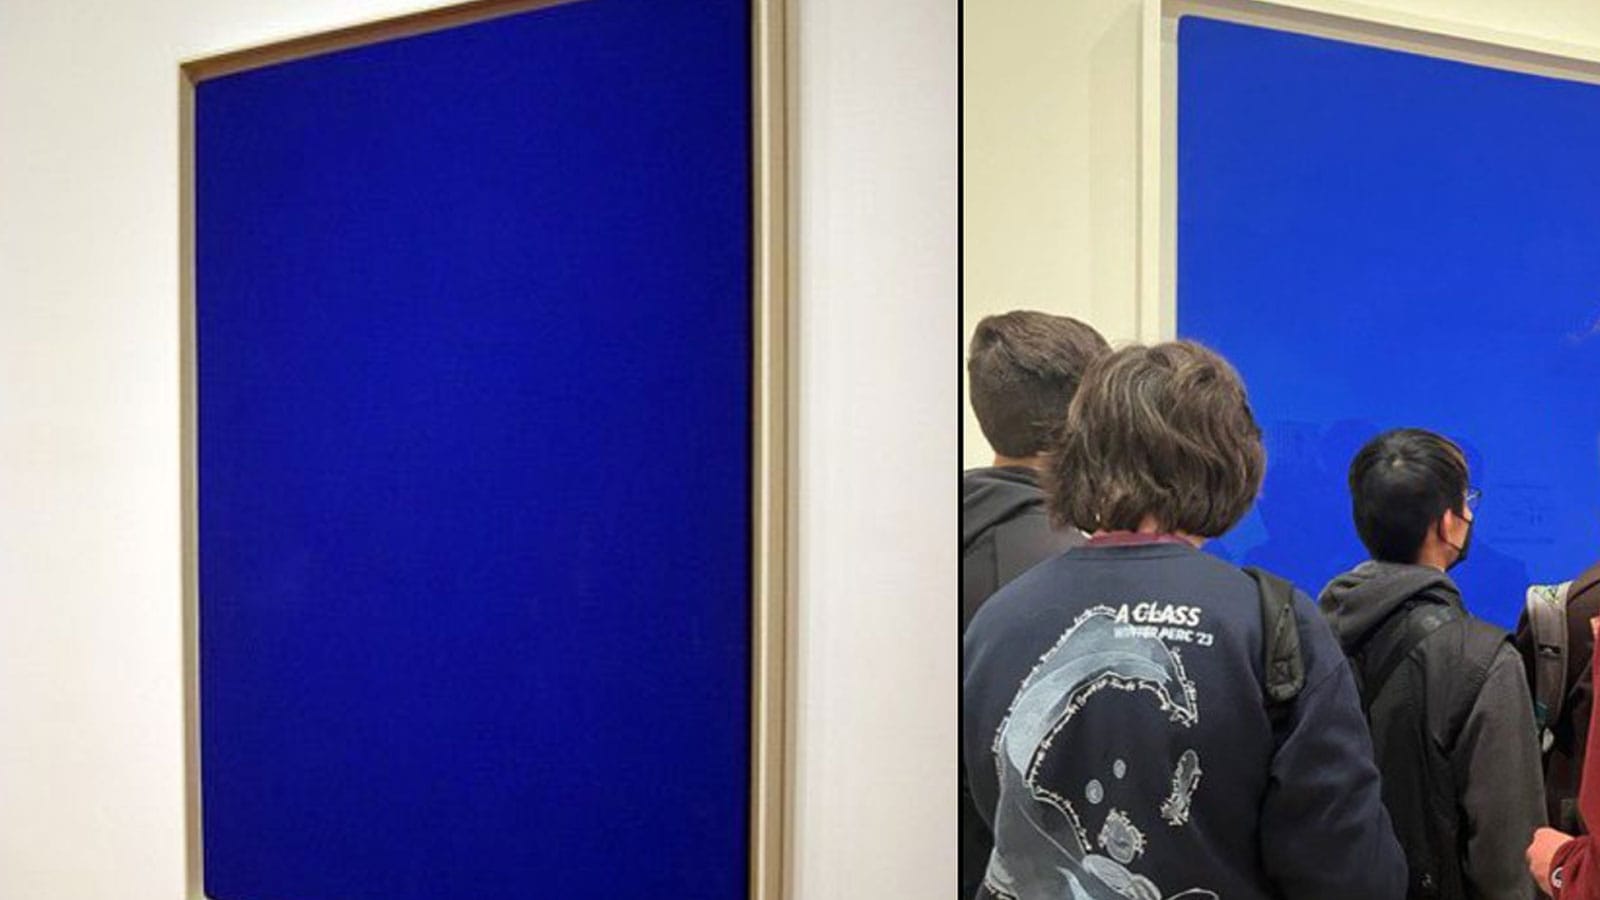 Yves Klein's Blue Monochrome at MOMA New York; high school kids marveling the painting